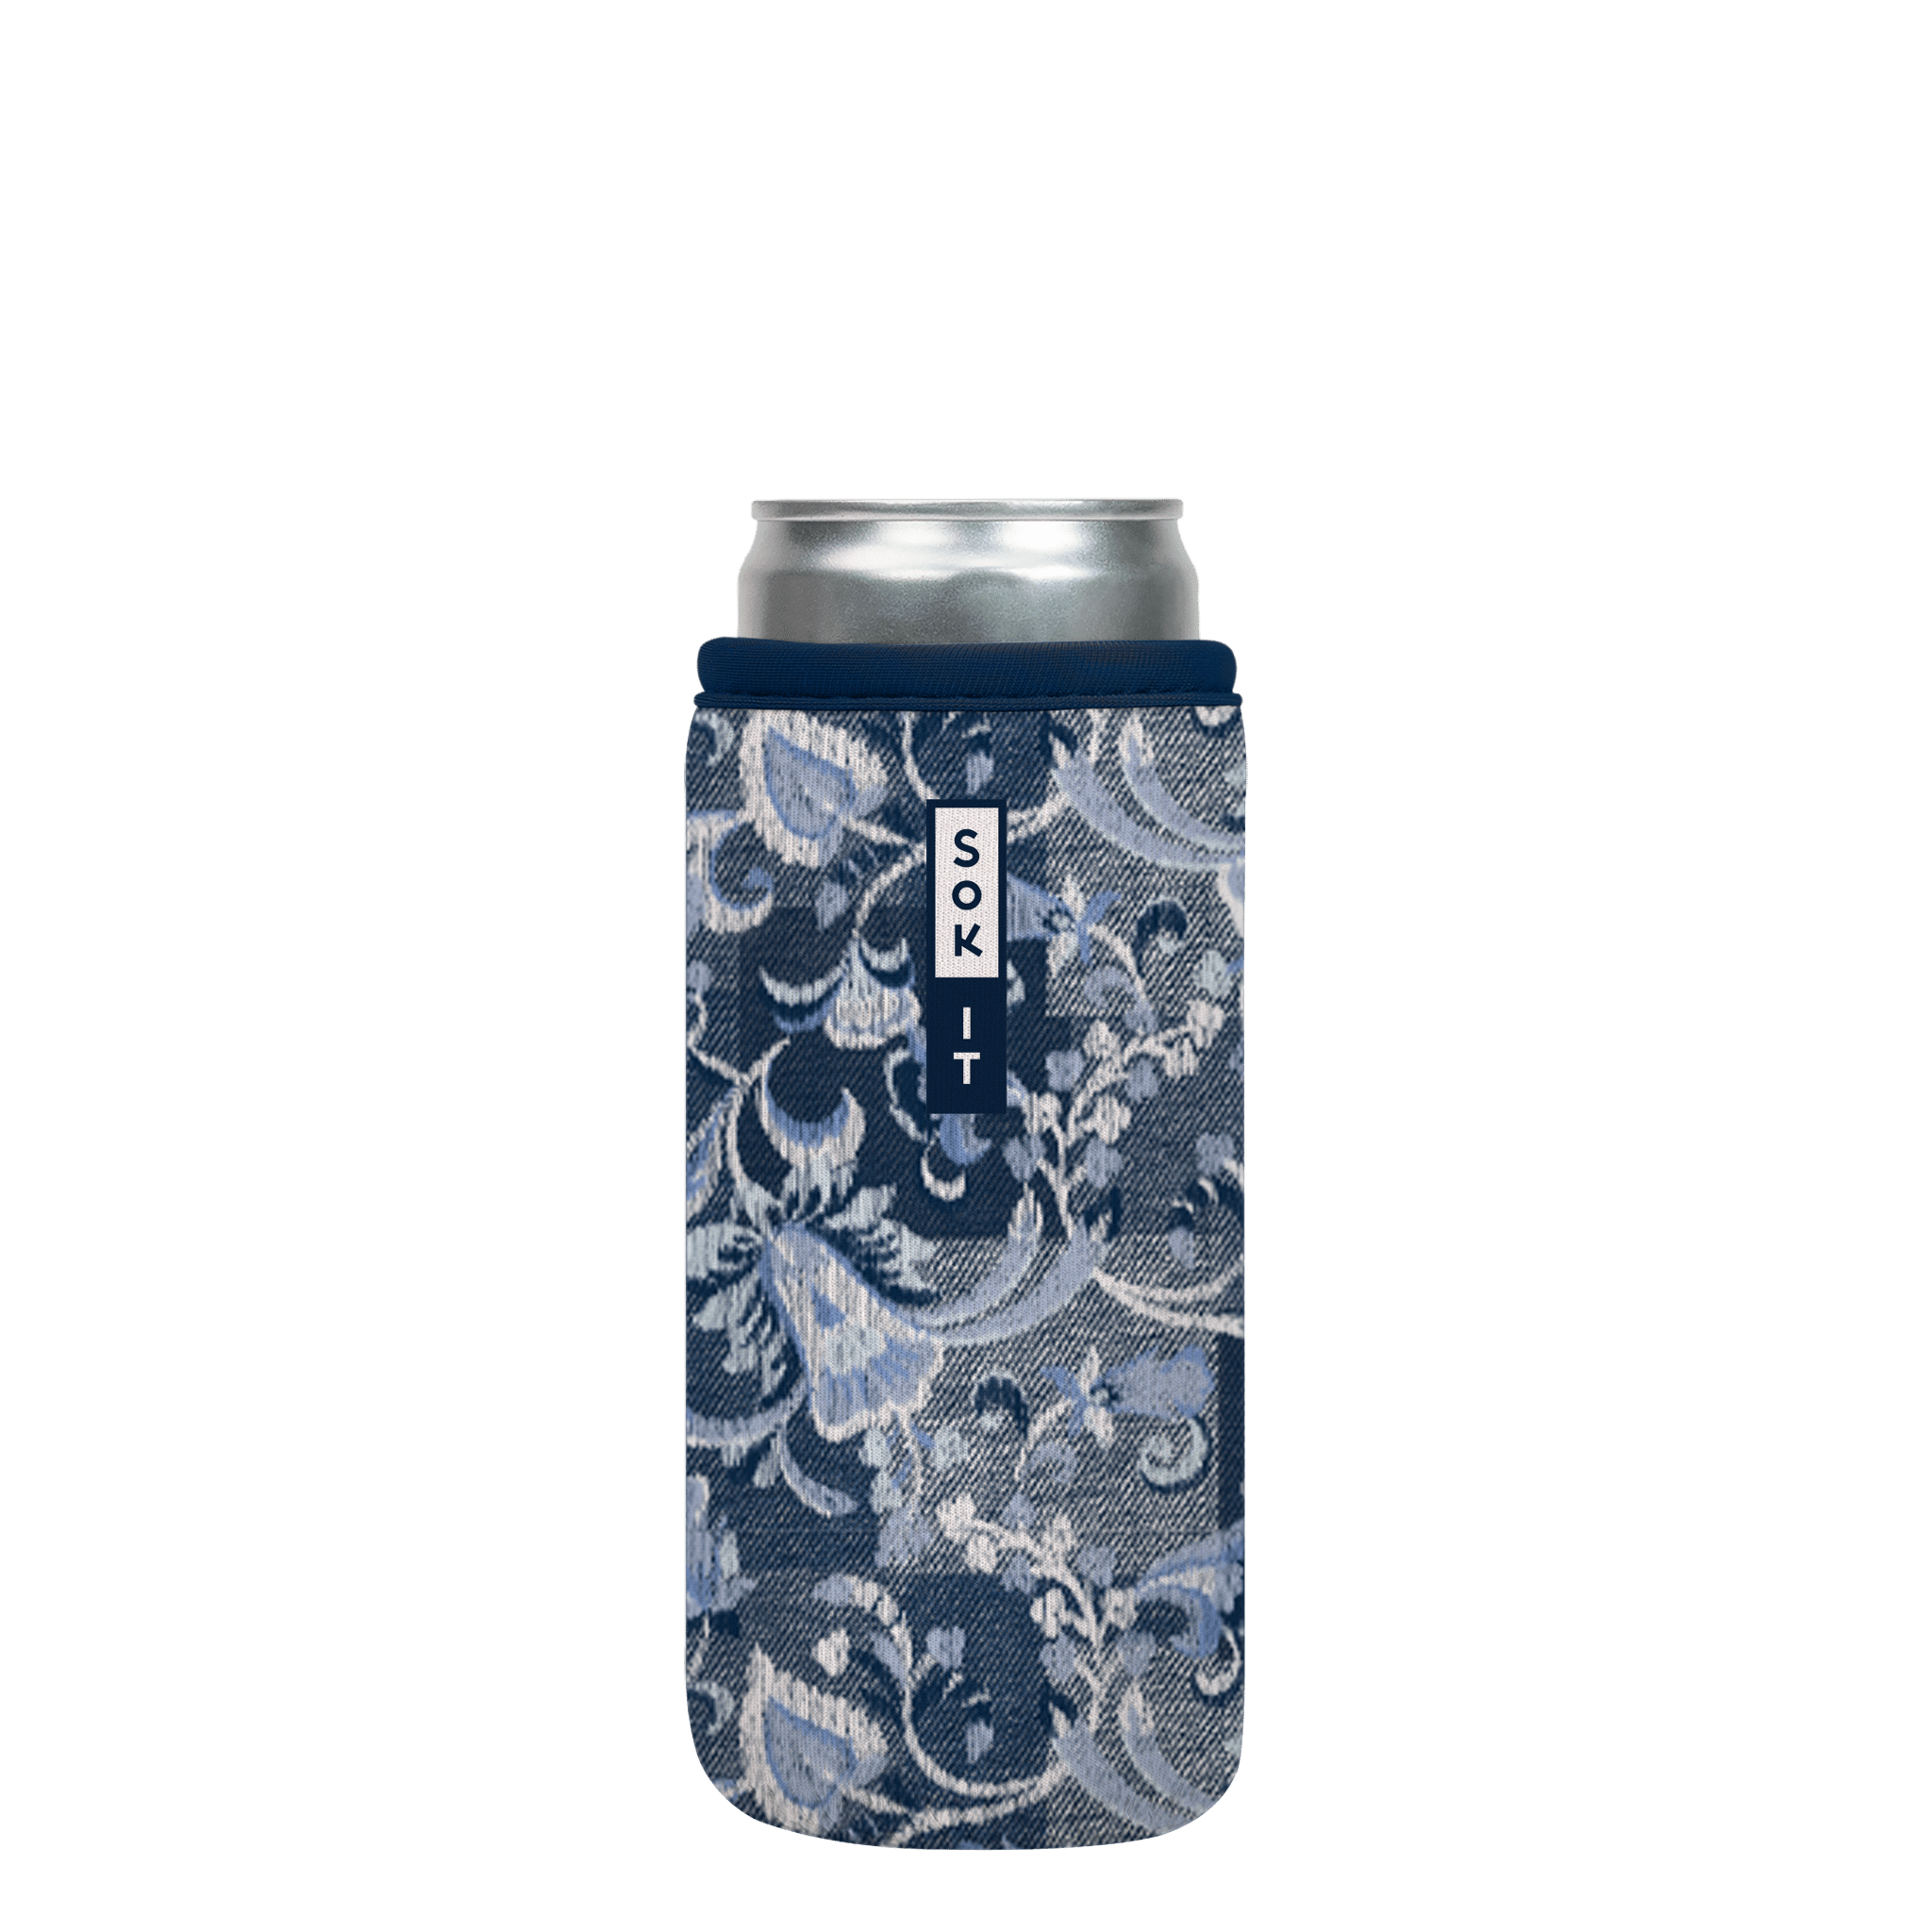 CanSok-Floral 12oz Slim Can 